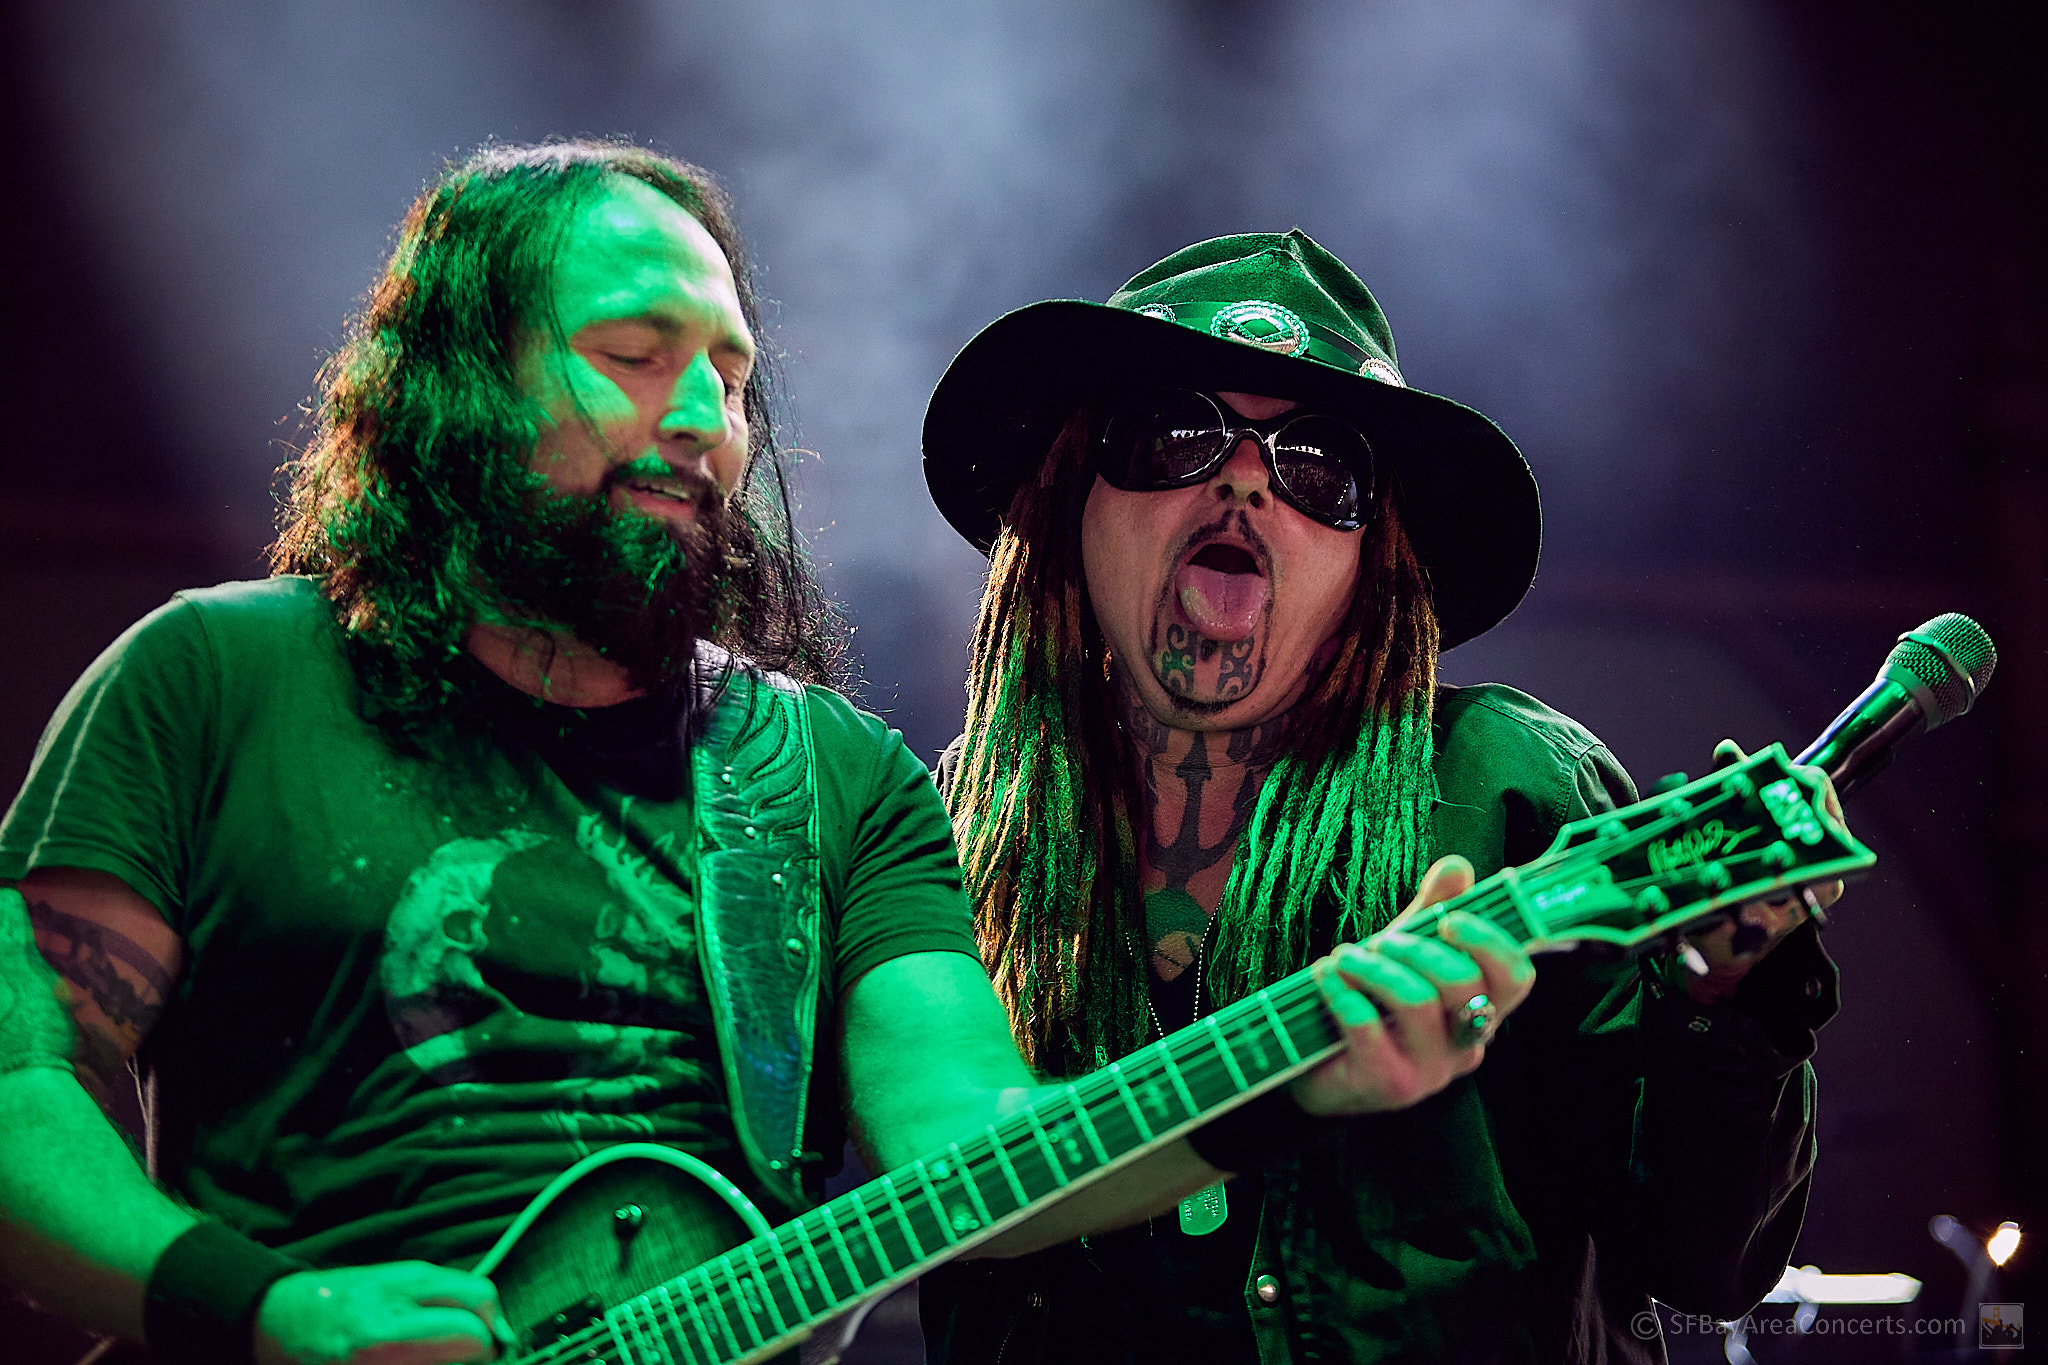 Monte Pittman & Al Jourgensen of Ministry @ the Concord Pavilion (Photo: Kevin Keating)